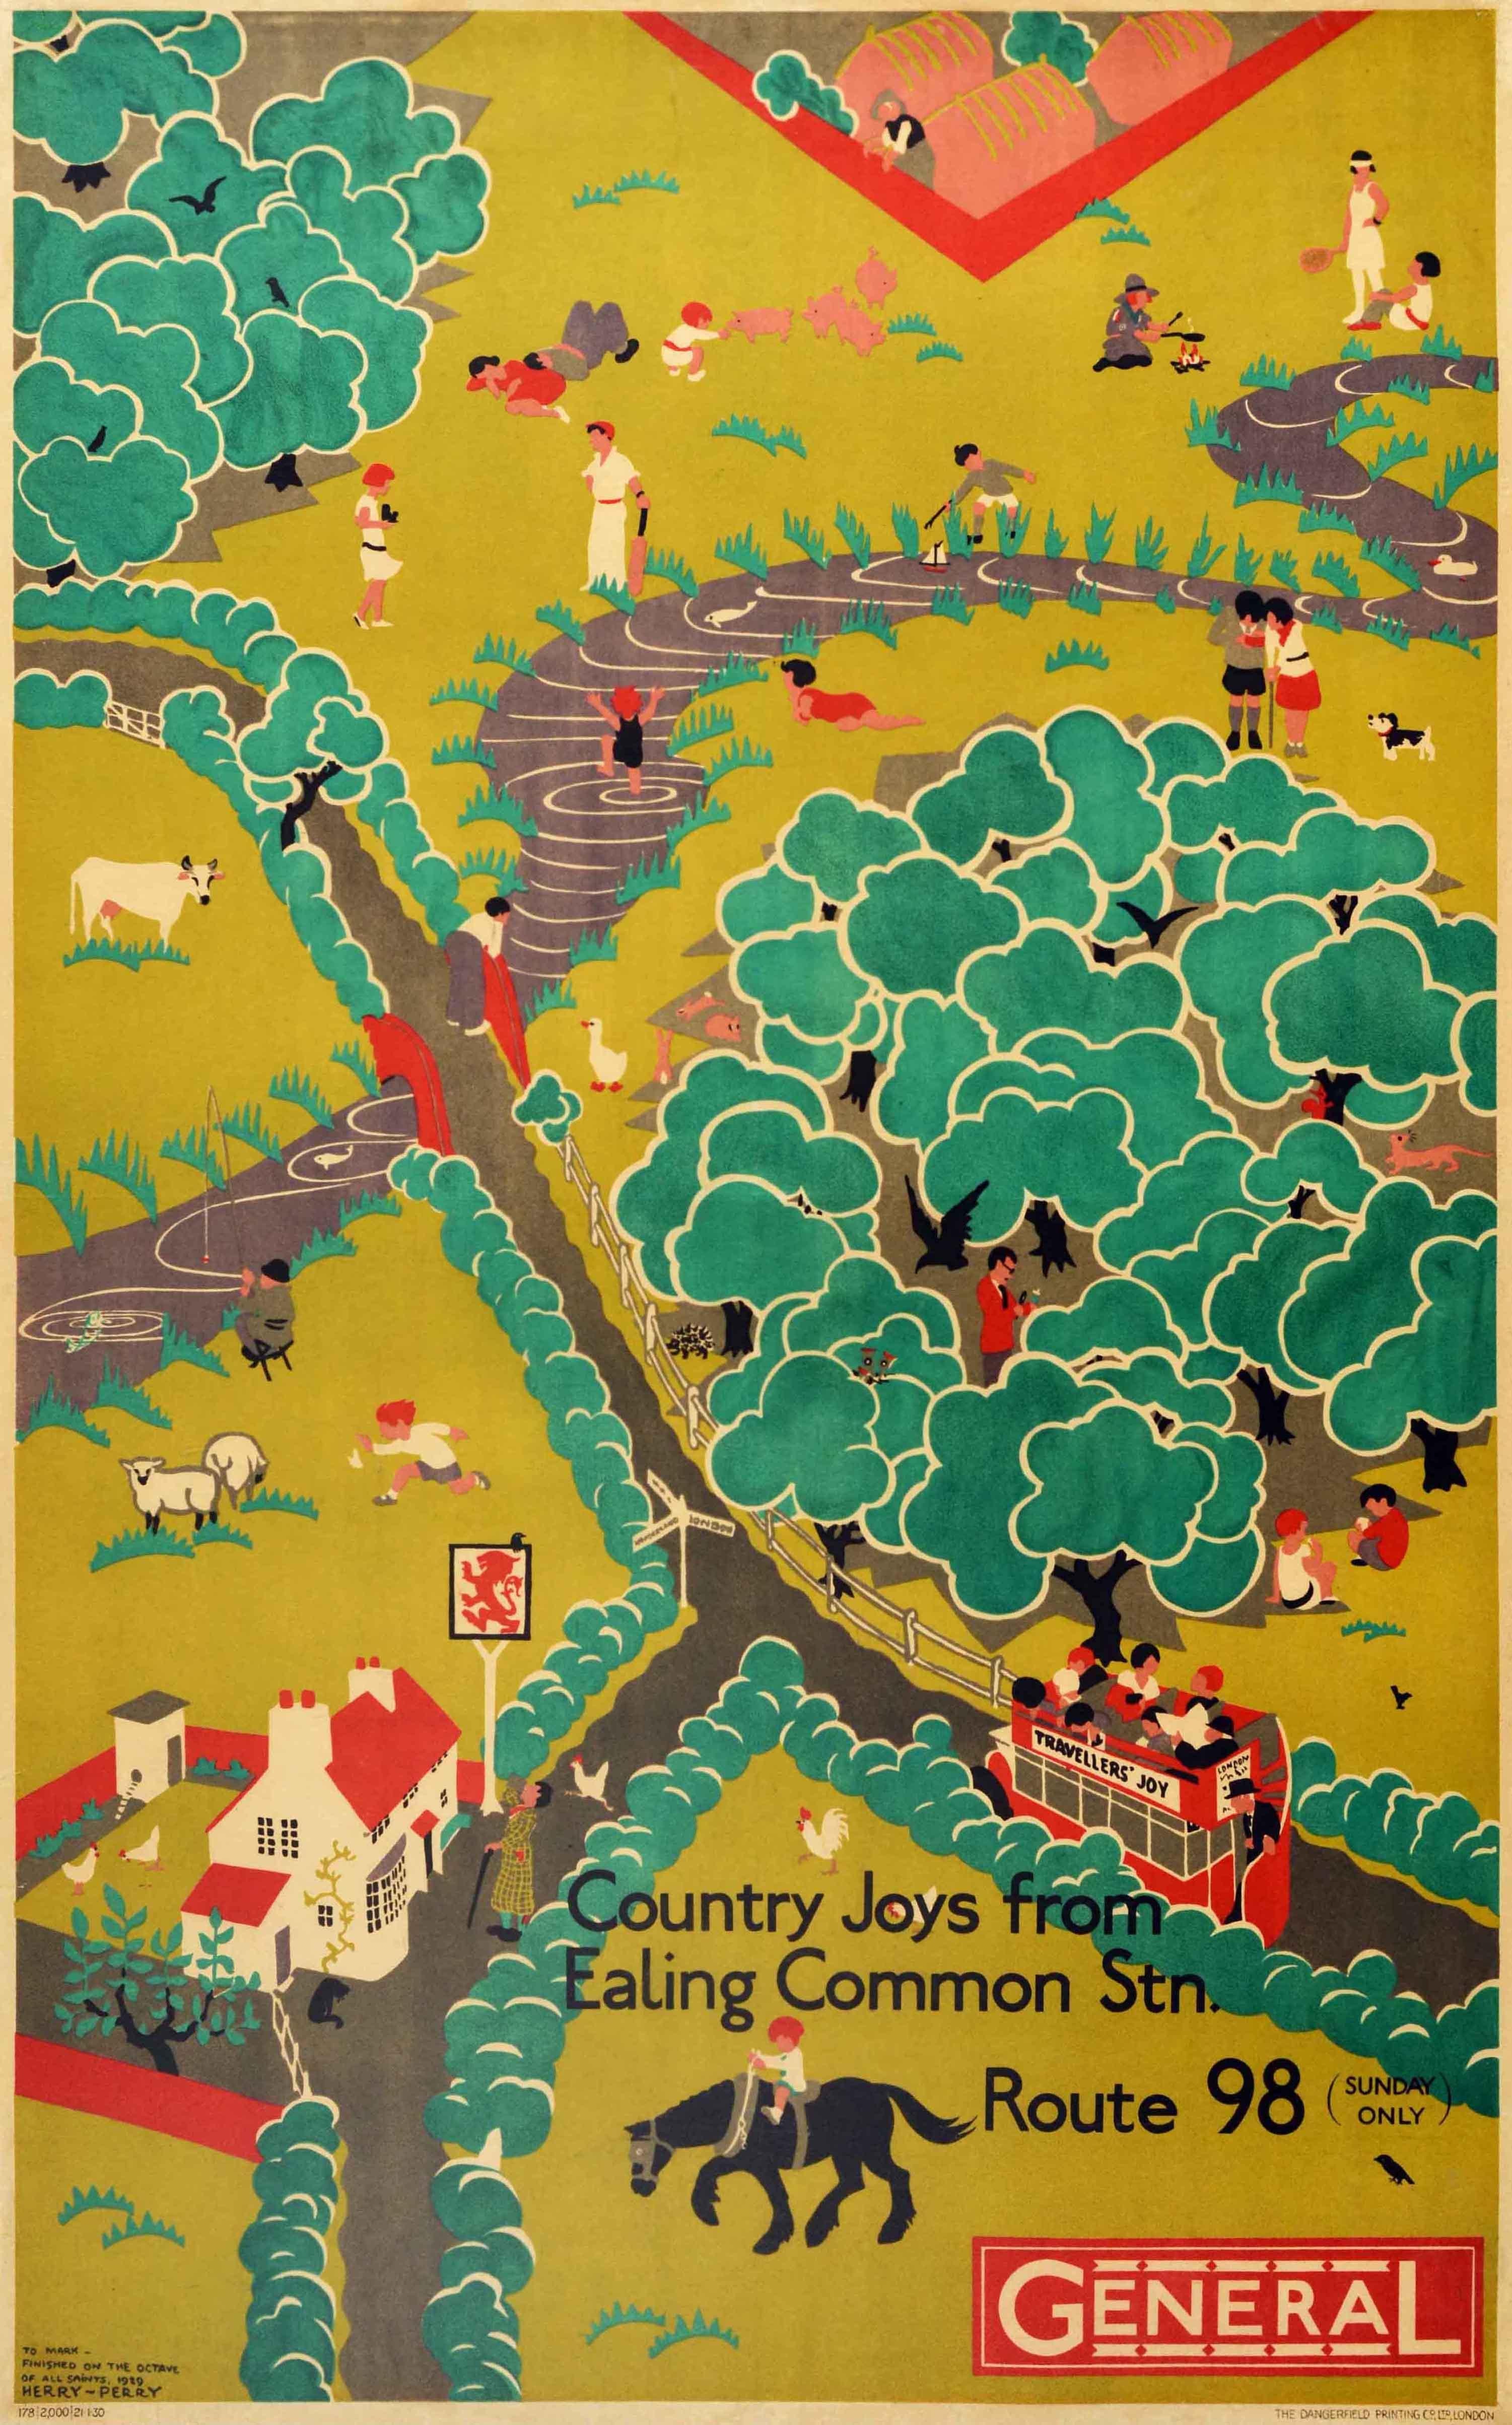 Original vintage London Transport travel poster - Country Joys from Ealing Common Station General Route 98 (Sunday Only) - featuring stunning artwork by the British artist Heather Perry (Herry; 1893-1962) showing people on a red rover open topped